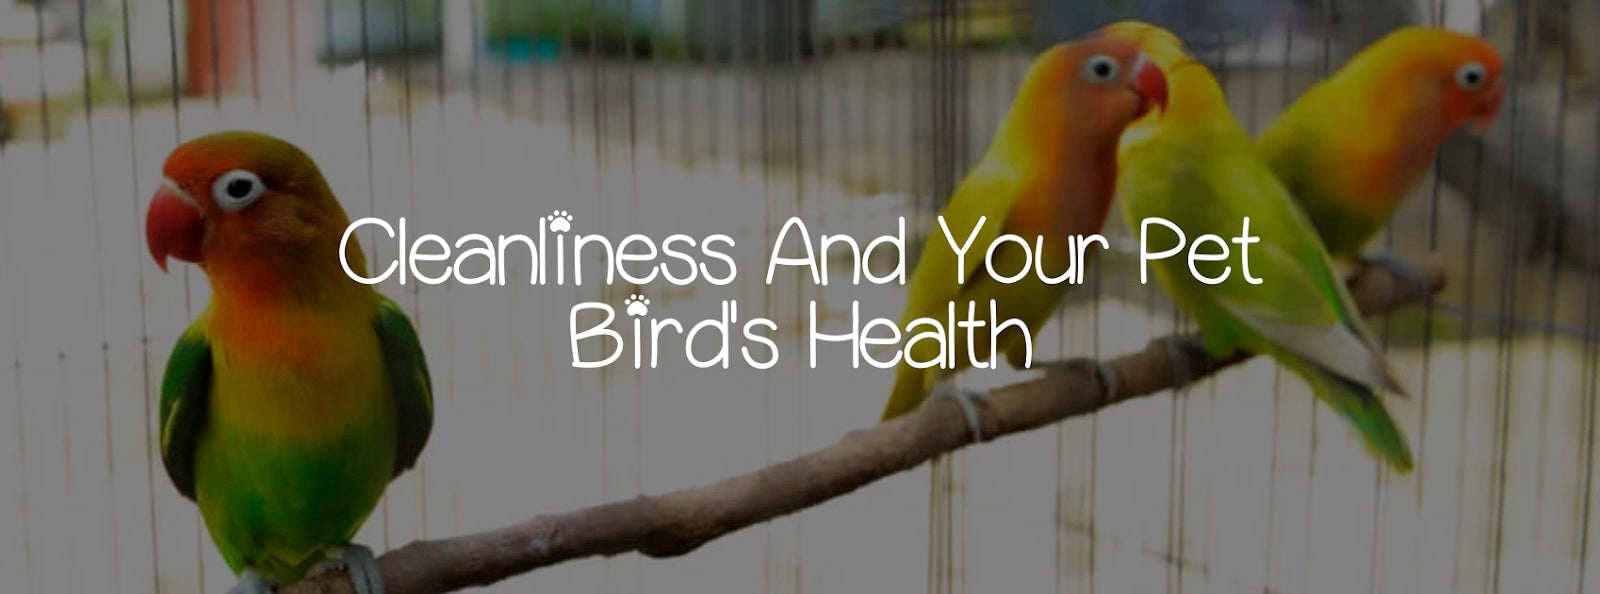 CLEANLINESS AND YOUR PET BIRD'S HEALTH